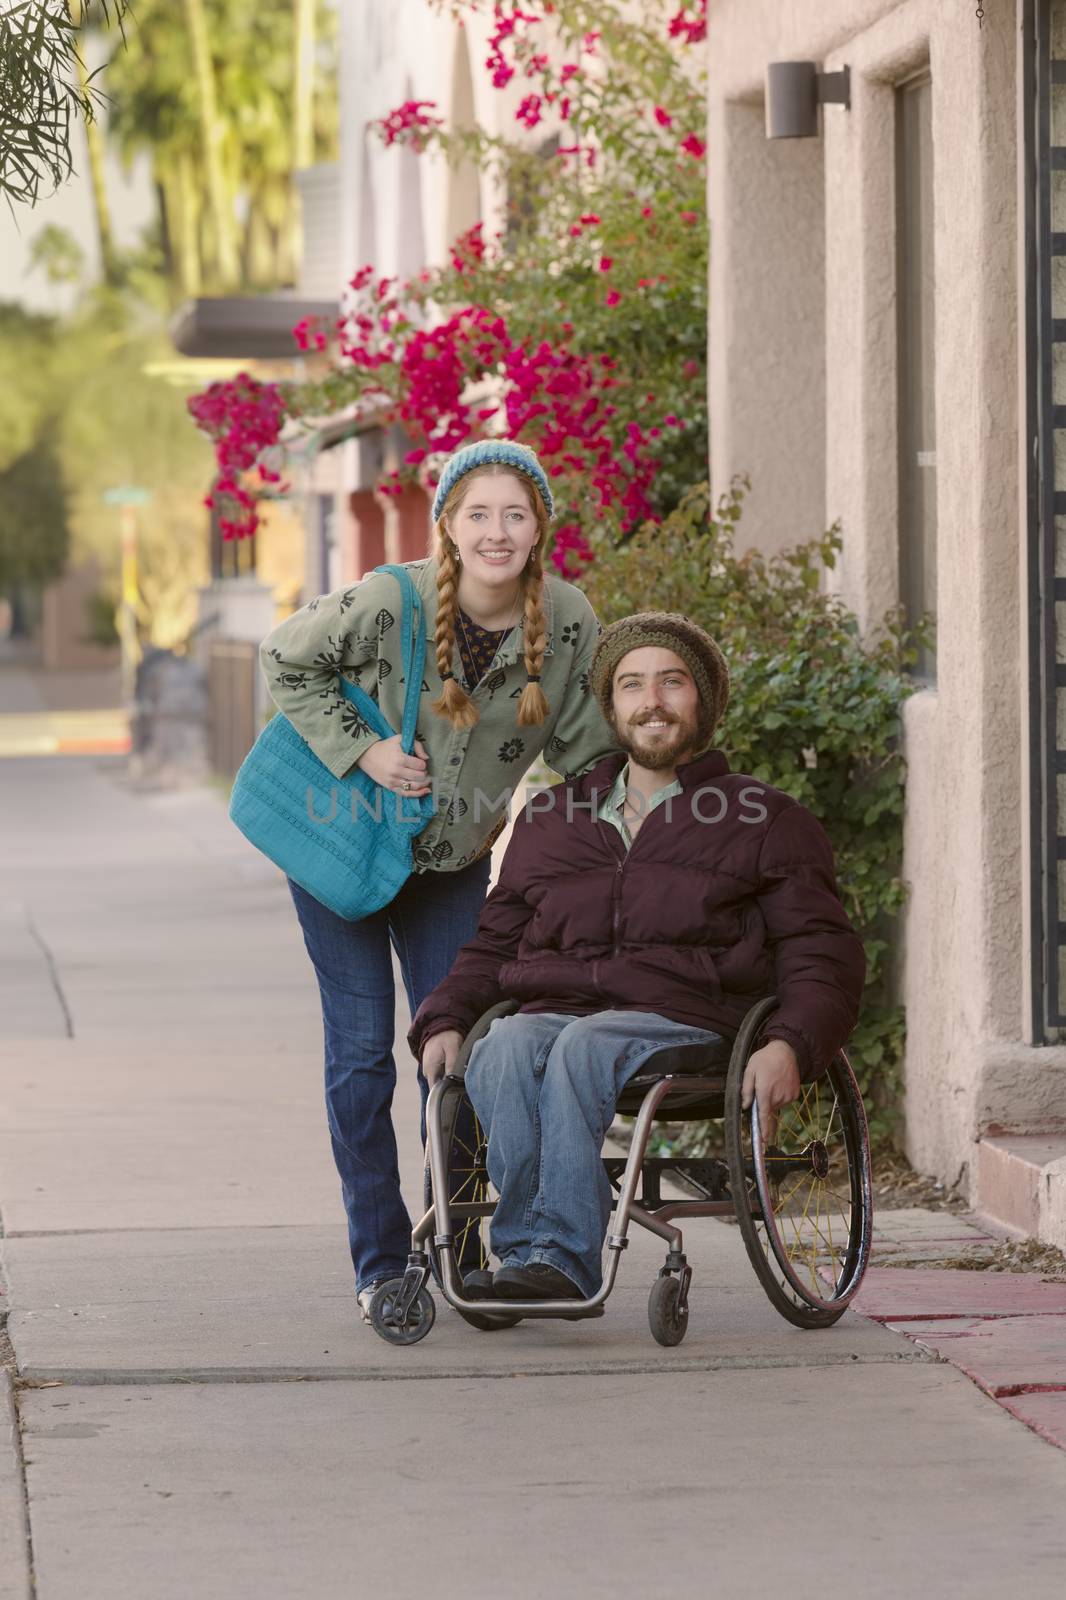 Young Woman and Man in Wheelchair on Sidewalk by Creatista